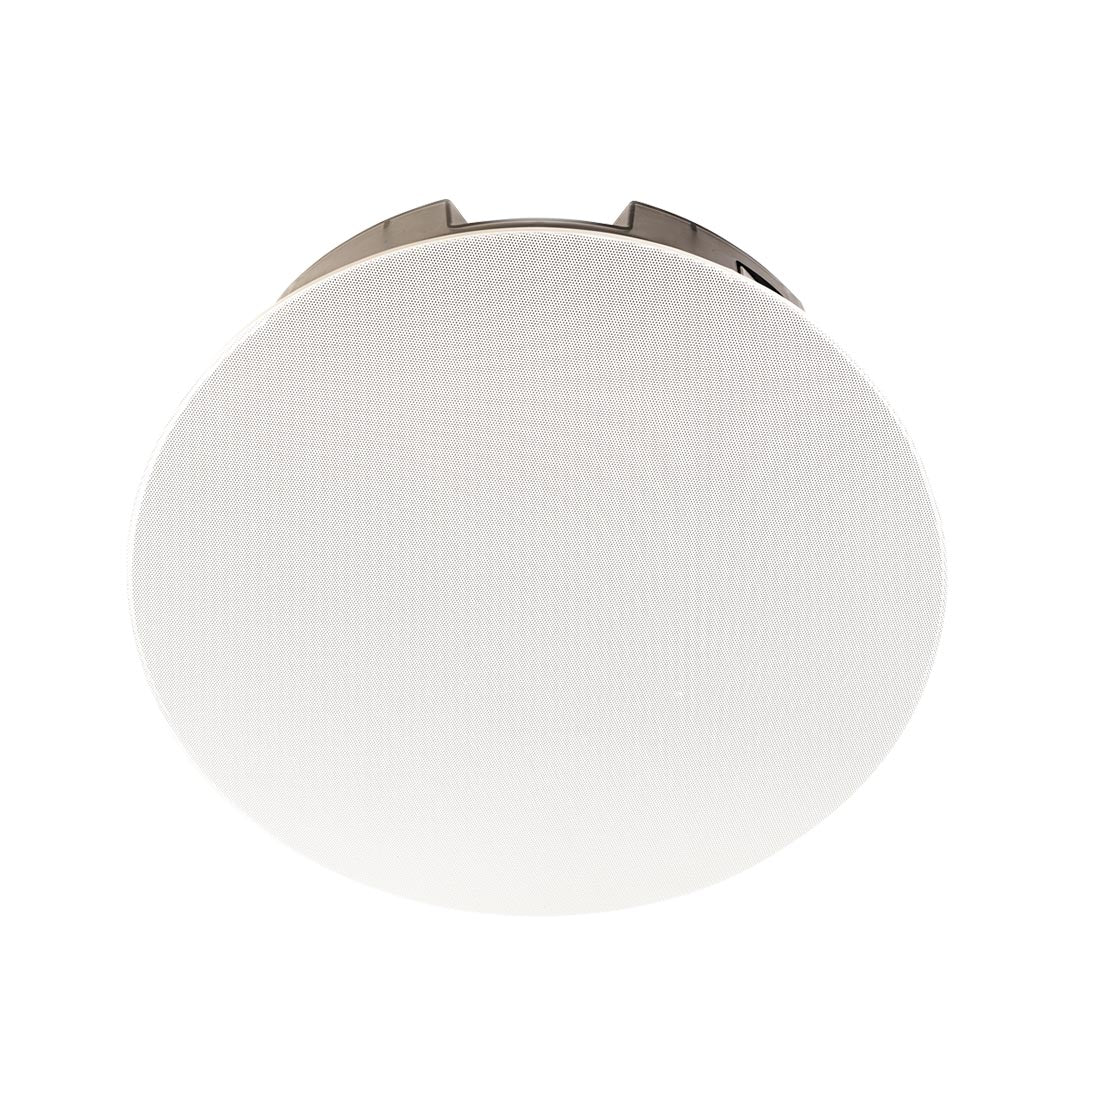 Paradigm CI Elite E80-A v2 8” Round In-Ceiling Speaker with 30°- Angled Guided SoundField – Each